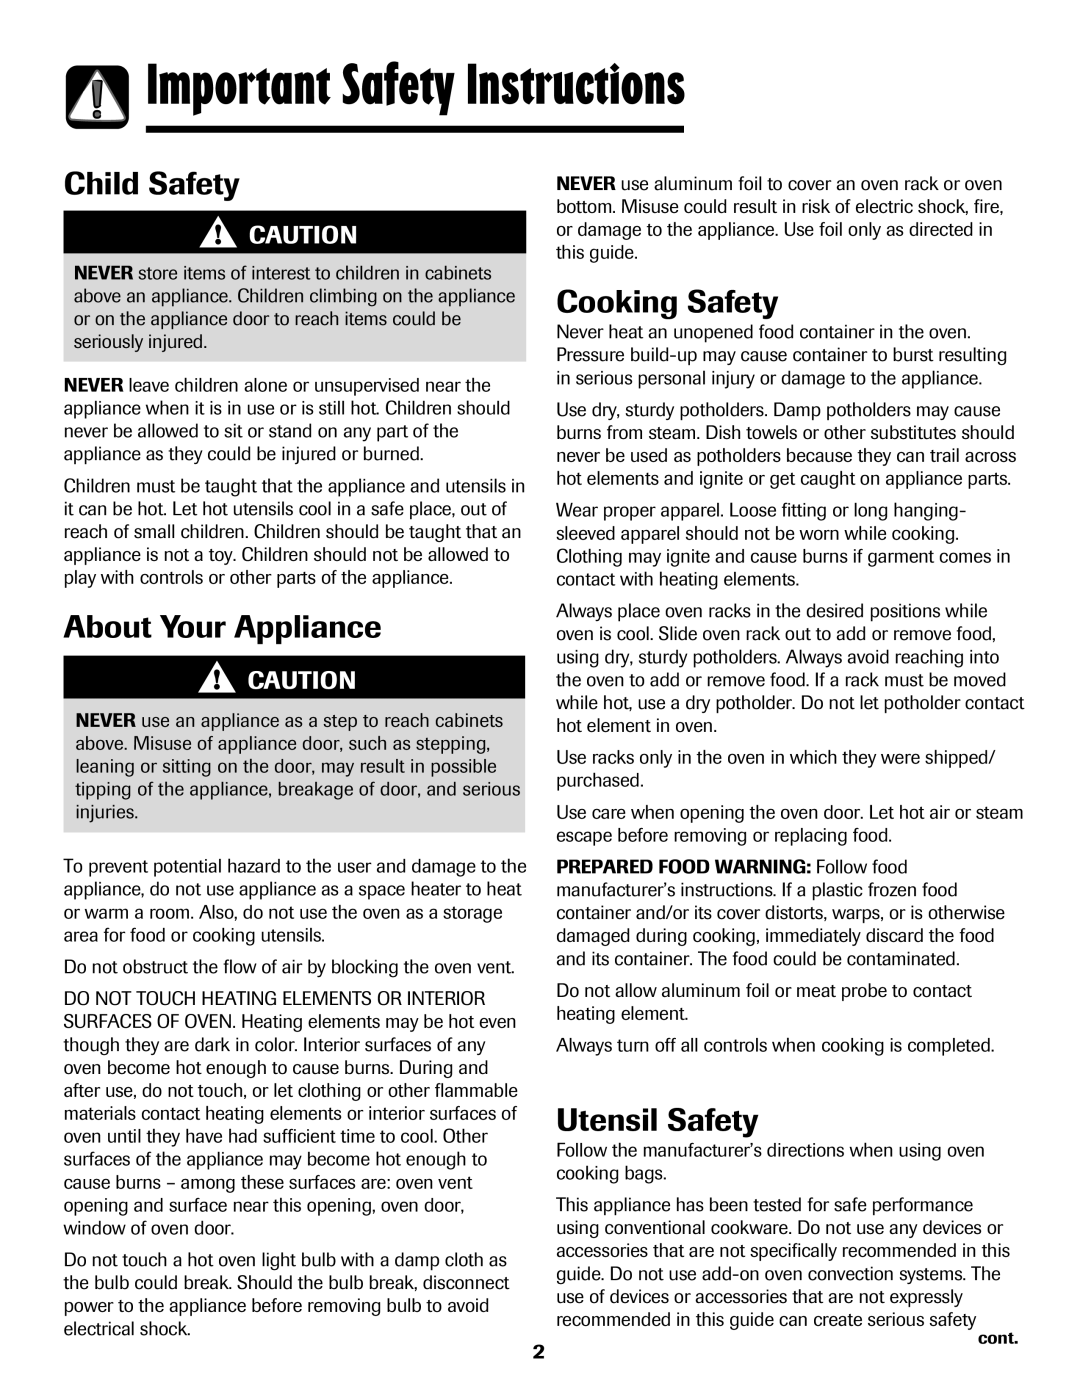 Amana 8113P487-60 Important Safety Instructions, Child Safety, About Your Appliance, Cooking Safety, Utensil Safety 